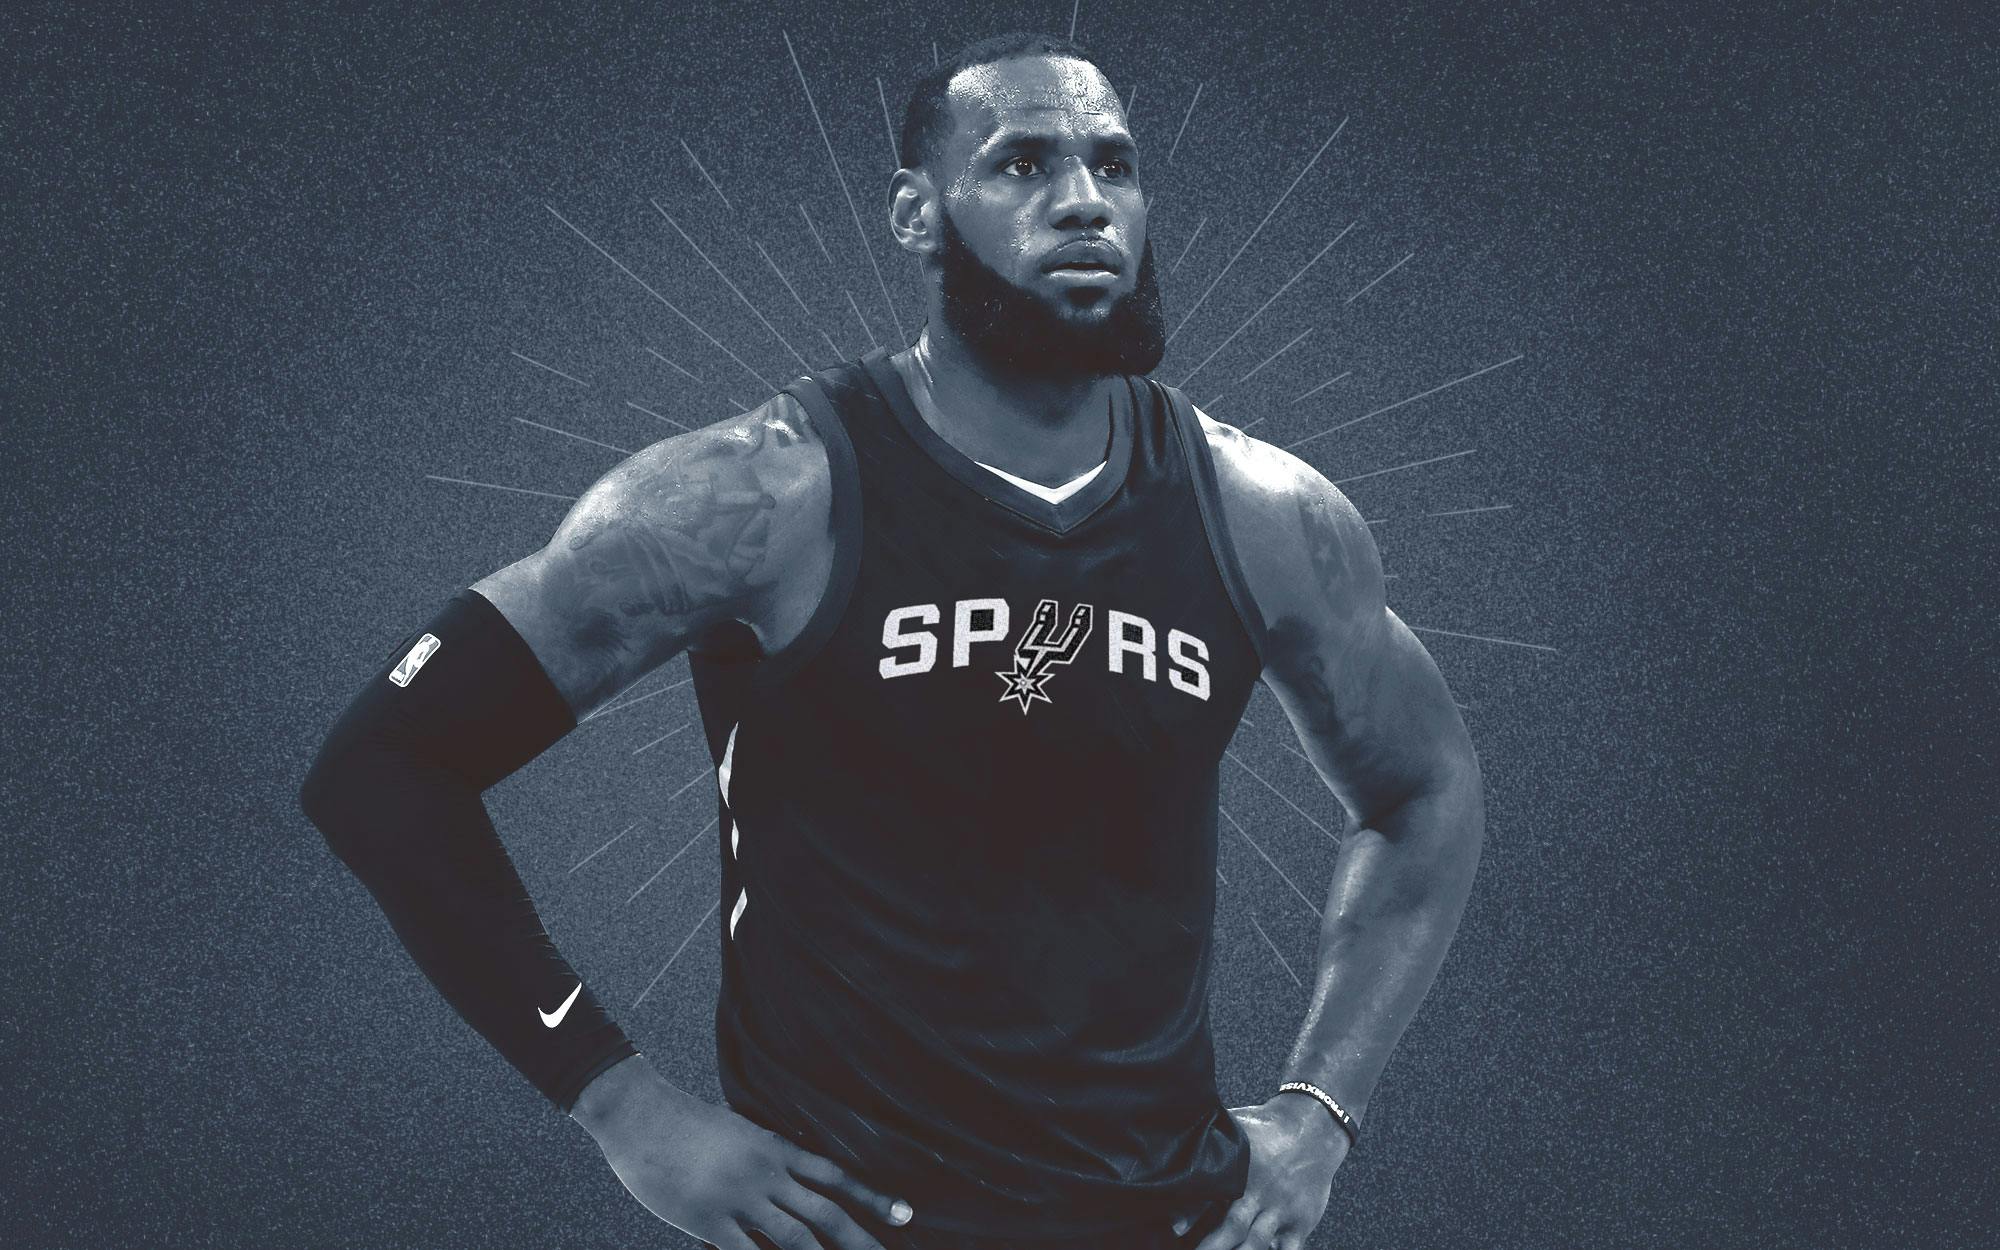 A Young LeBron James Once Rocked A San Antonio Spurs Jersey